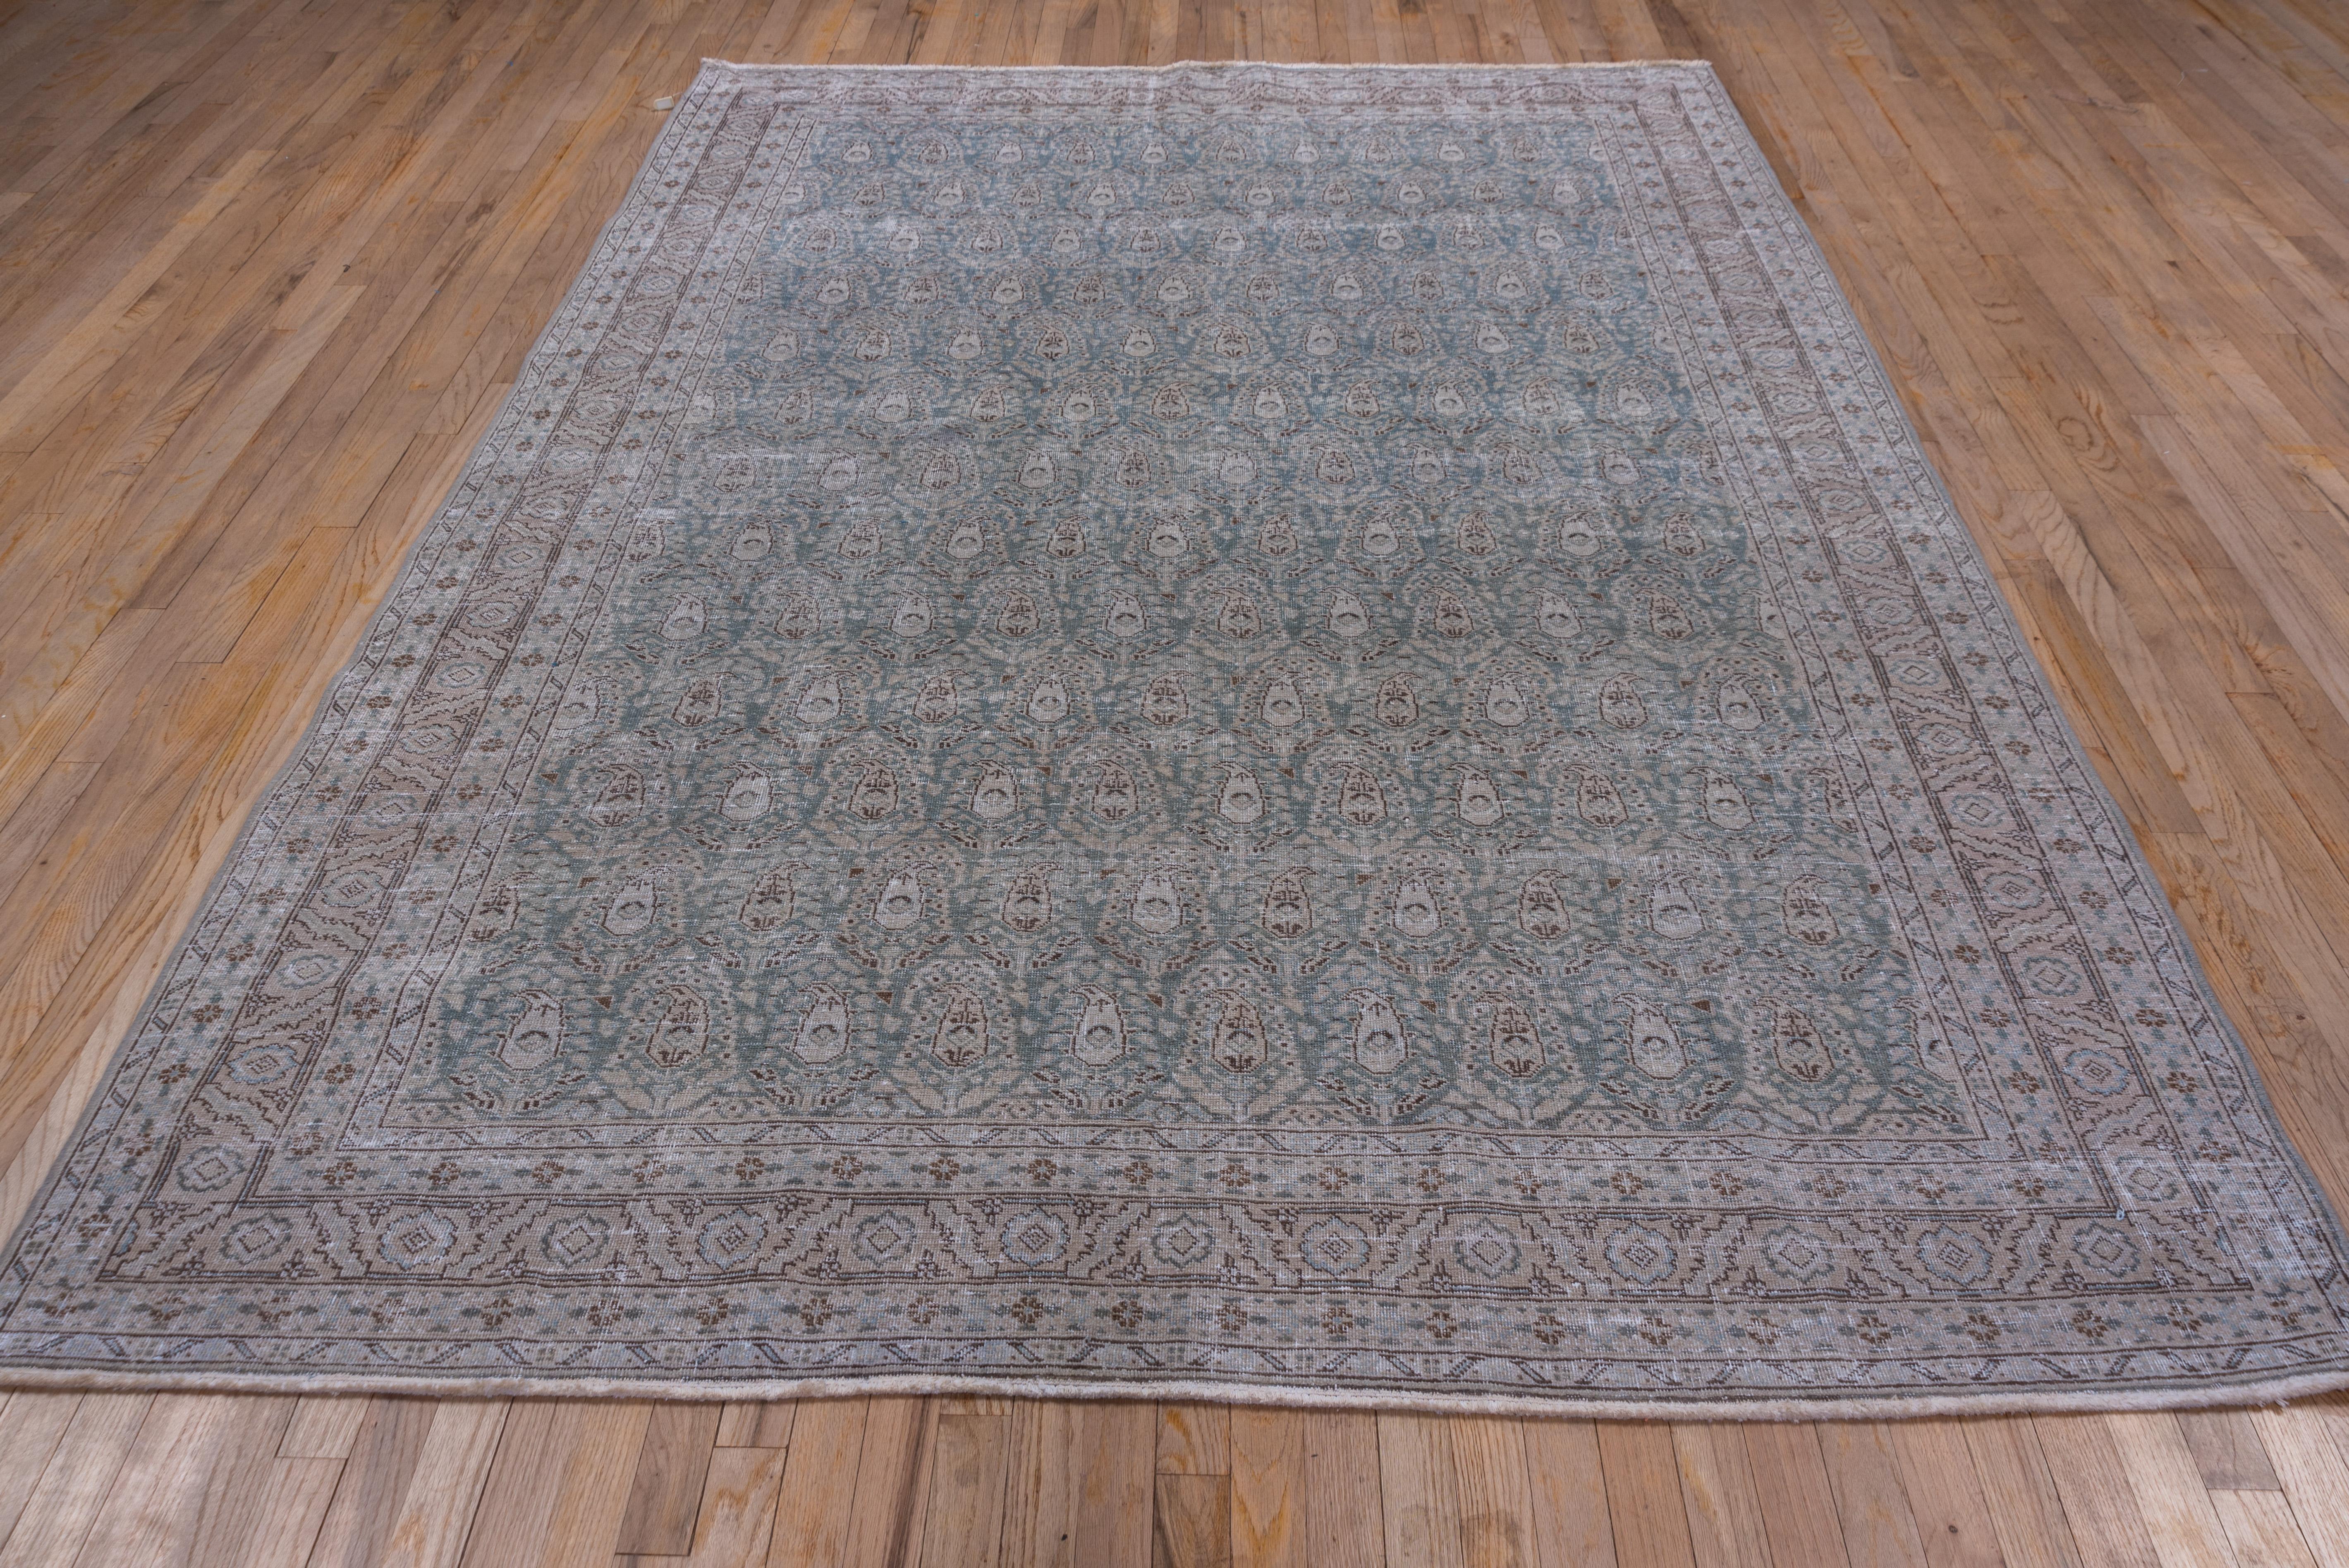 This Persian Tabriz rug has greyish field that displays rows of floriated botehs alternating in orientation row by offset row. The grayish main border shows bent leaves and bracketed rosettes in the NW Persian rustic style. Dark brown is a